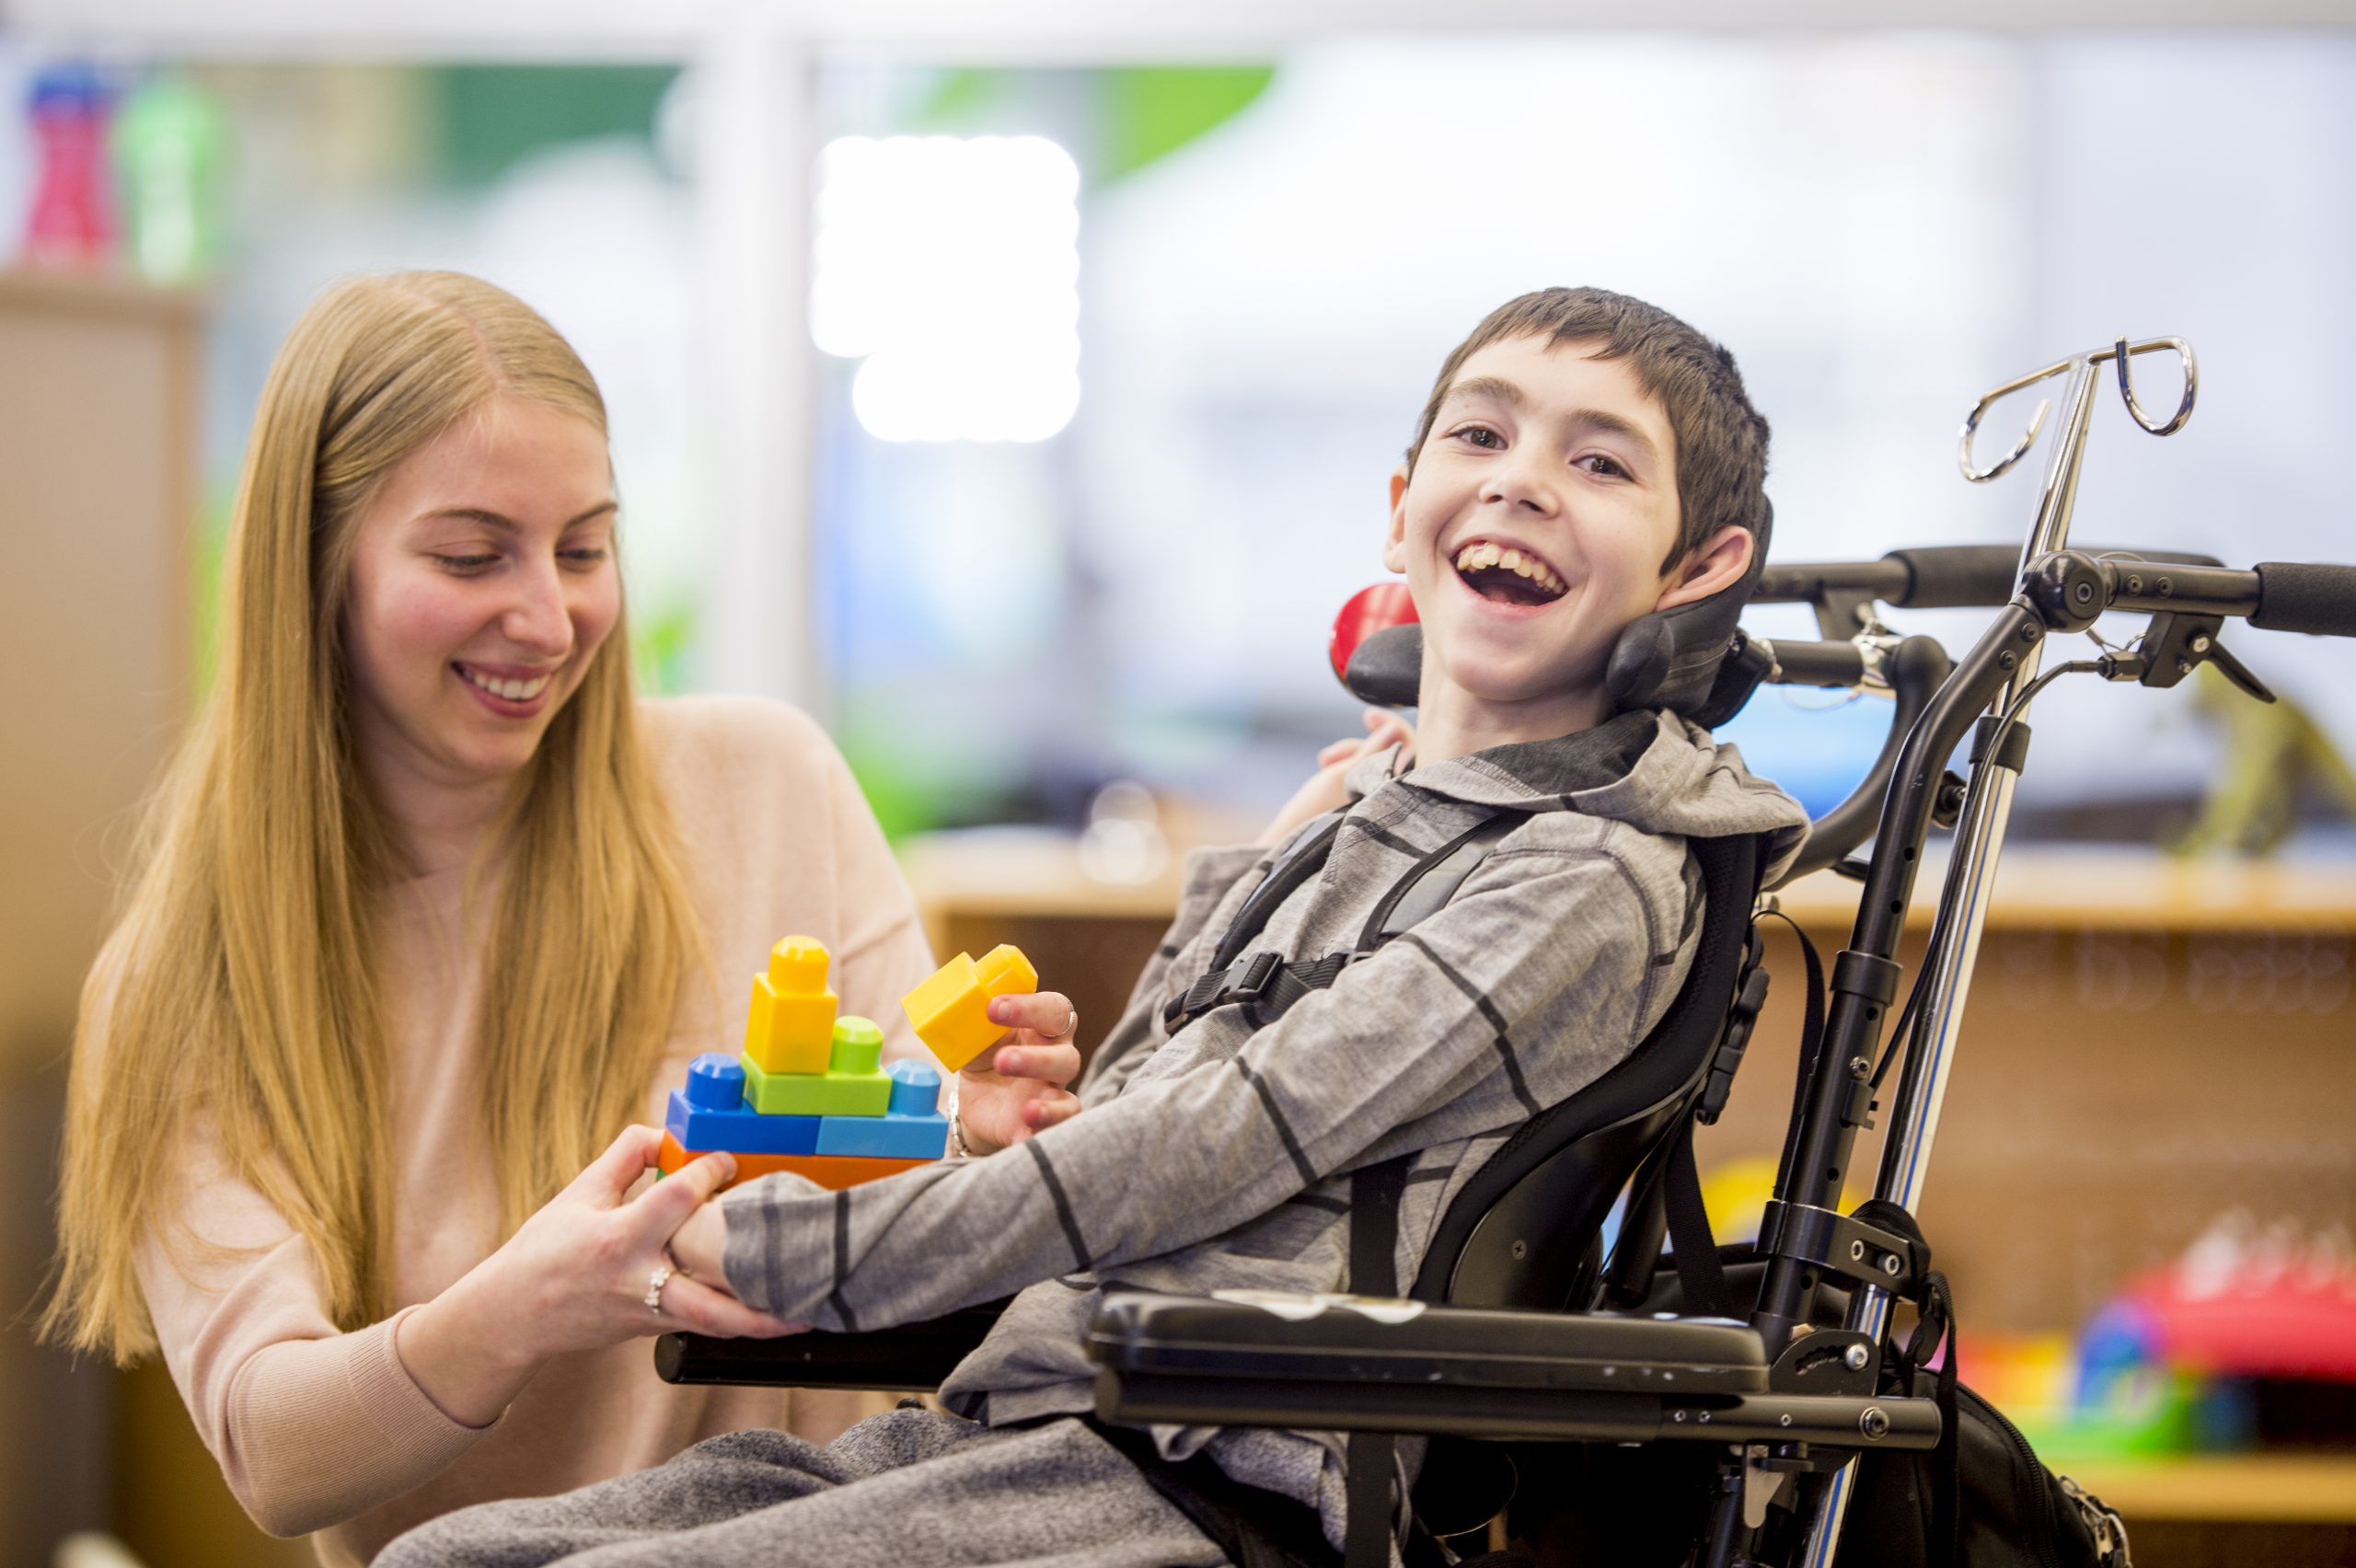 A caregiver is helping a young boy with a physical disability play with plastic block toys.